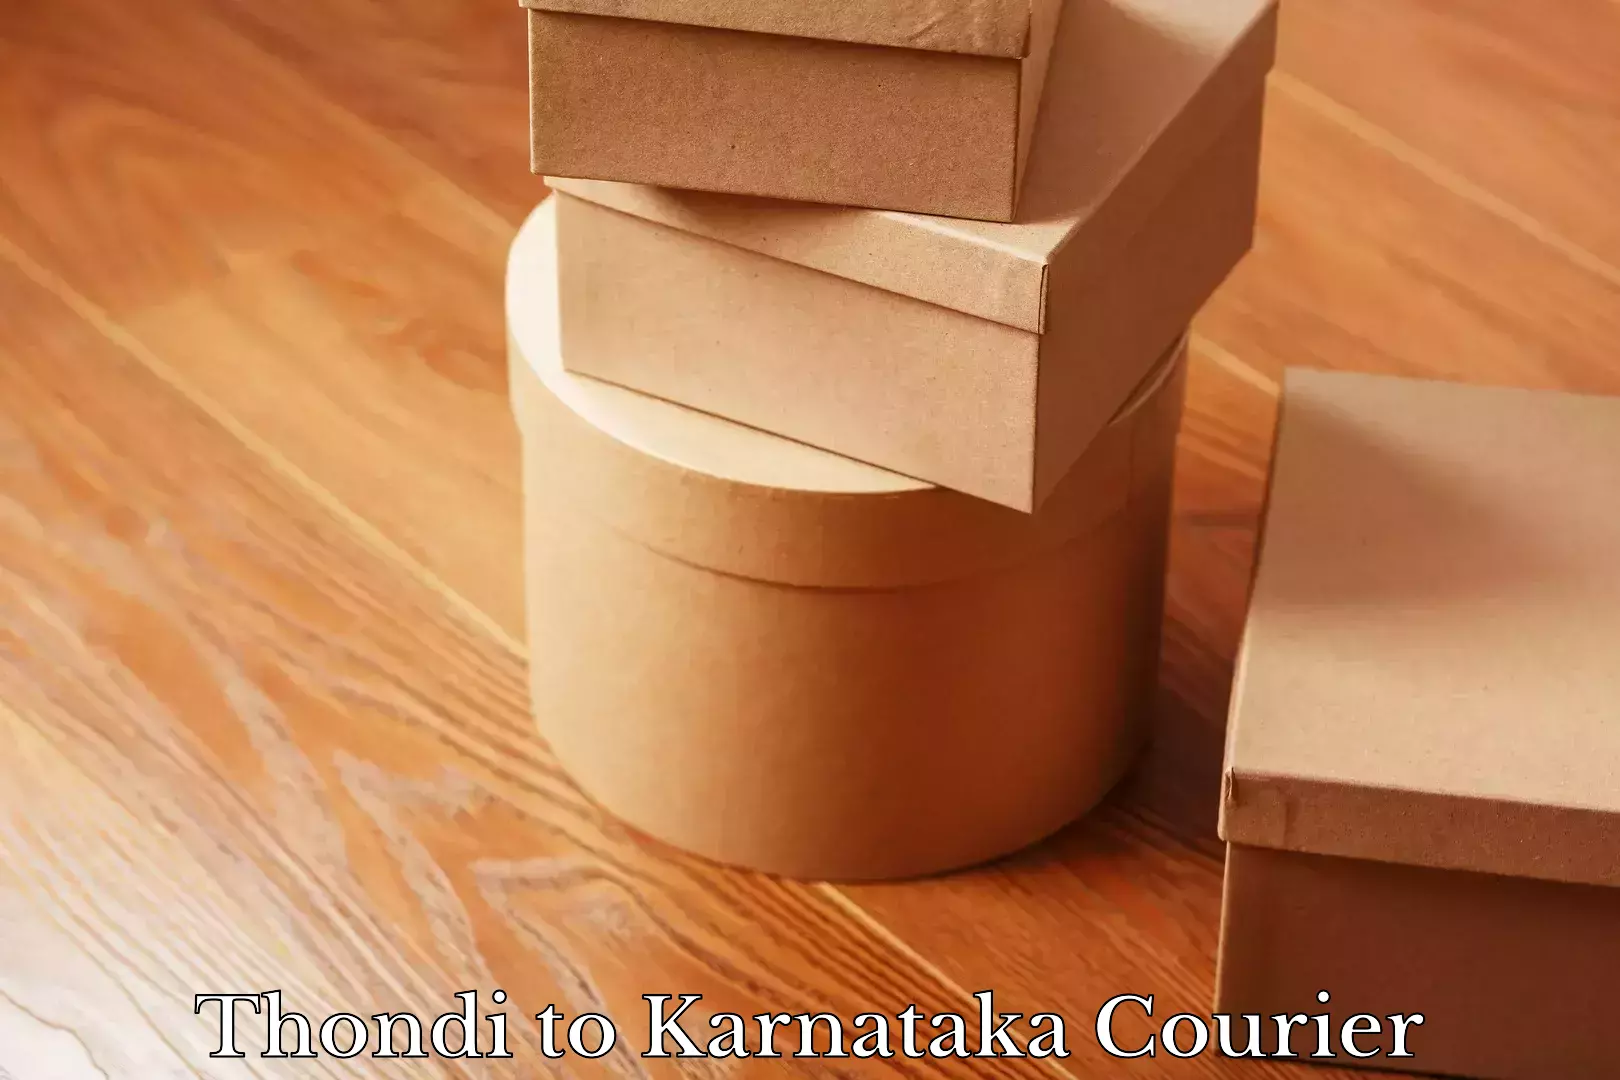 State-of-the-art courier technology in Thondi to Karnataka